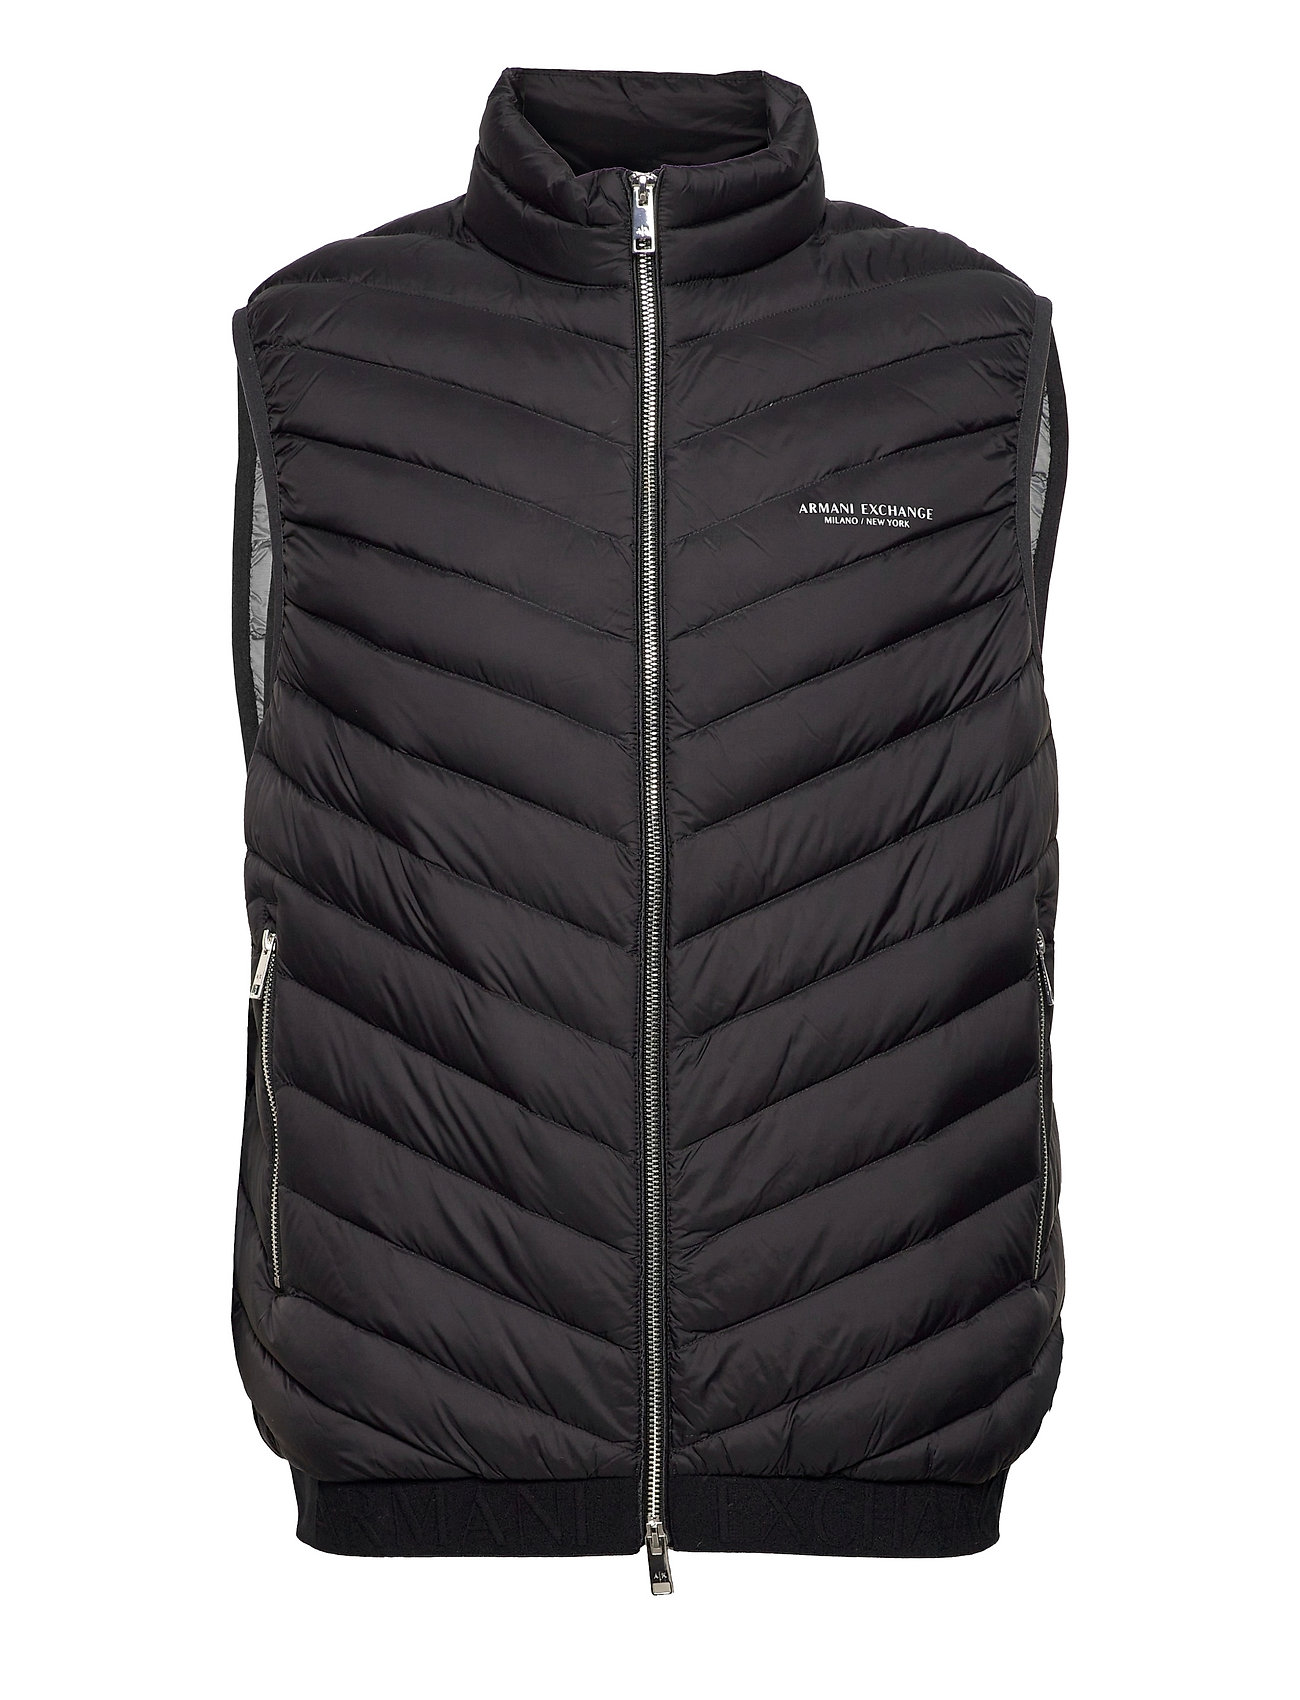 Armani Exchange Gilet Piumino - 155 €. Buy Vests from Armani Exchange  online at . Fast delivery and easy returns